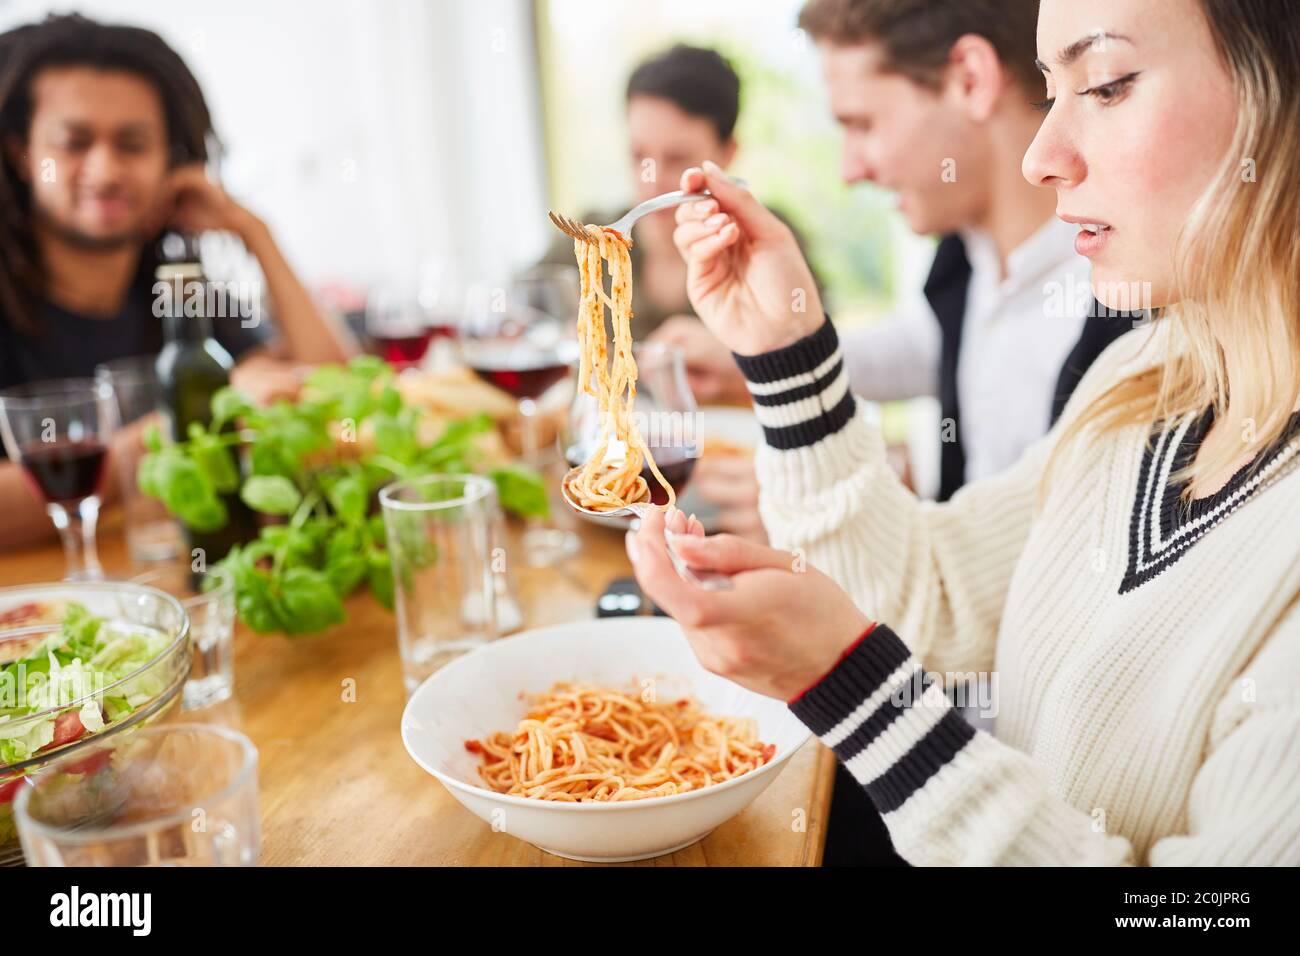 Woman eating spaghetti with tomato sauce with friends at dining table while having meal together Stock Photo